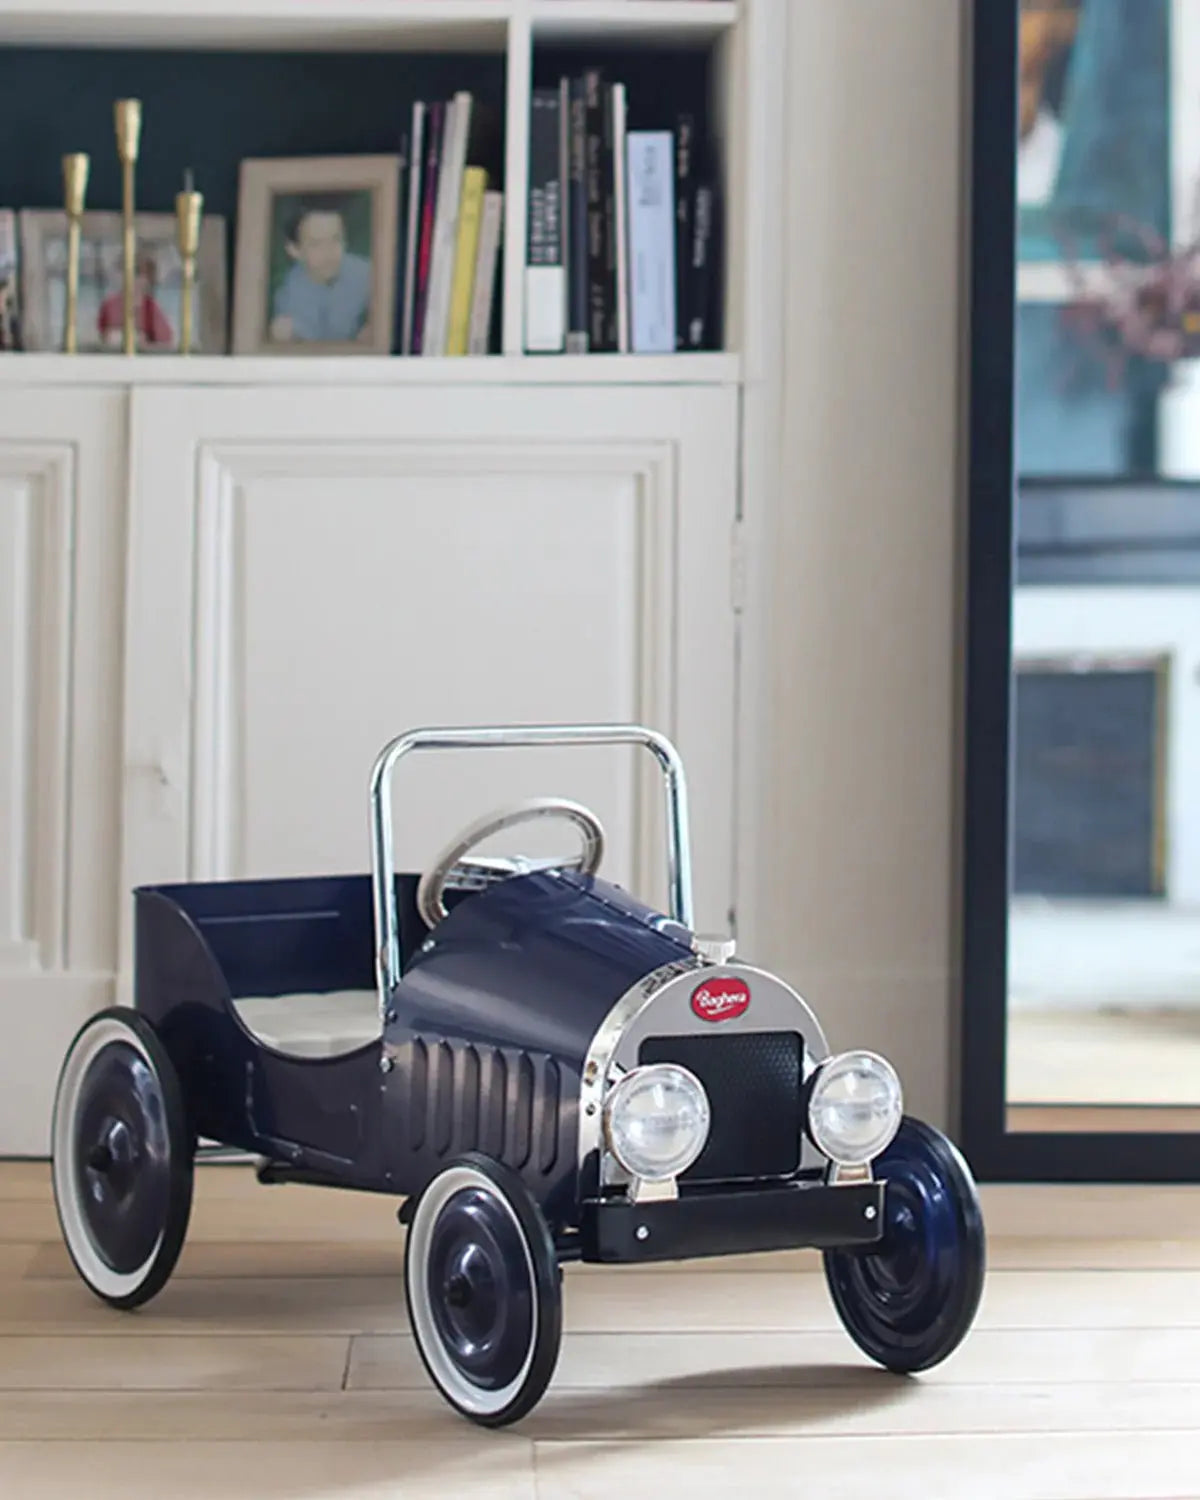 Classic Pedal Car, Ride-On Car with Adjustable Pedals, Durable Toy Car, Kids Ride-On Vehicle  Baghera   